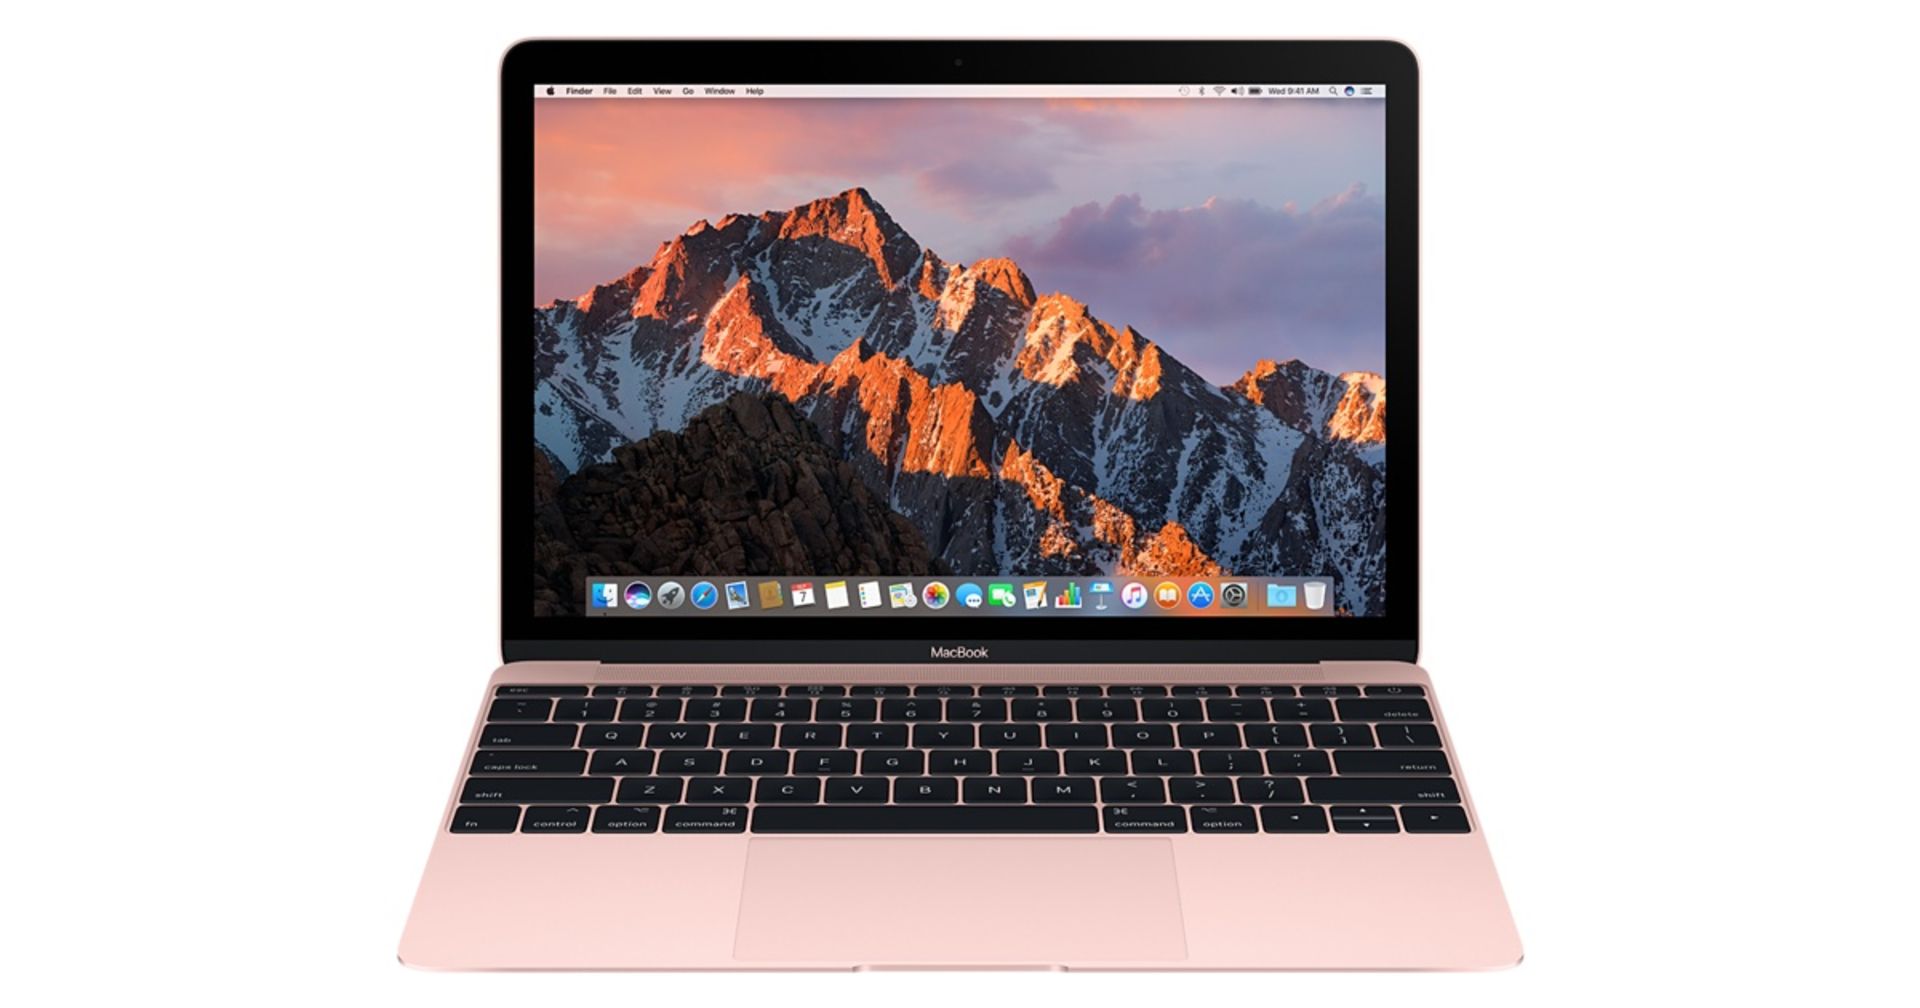 V Grade A Apple MacBook 12-Inch Notebook with Retina Display-1.2GHz Dual Core Intel M5 with 4MB L3